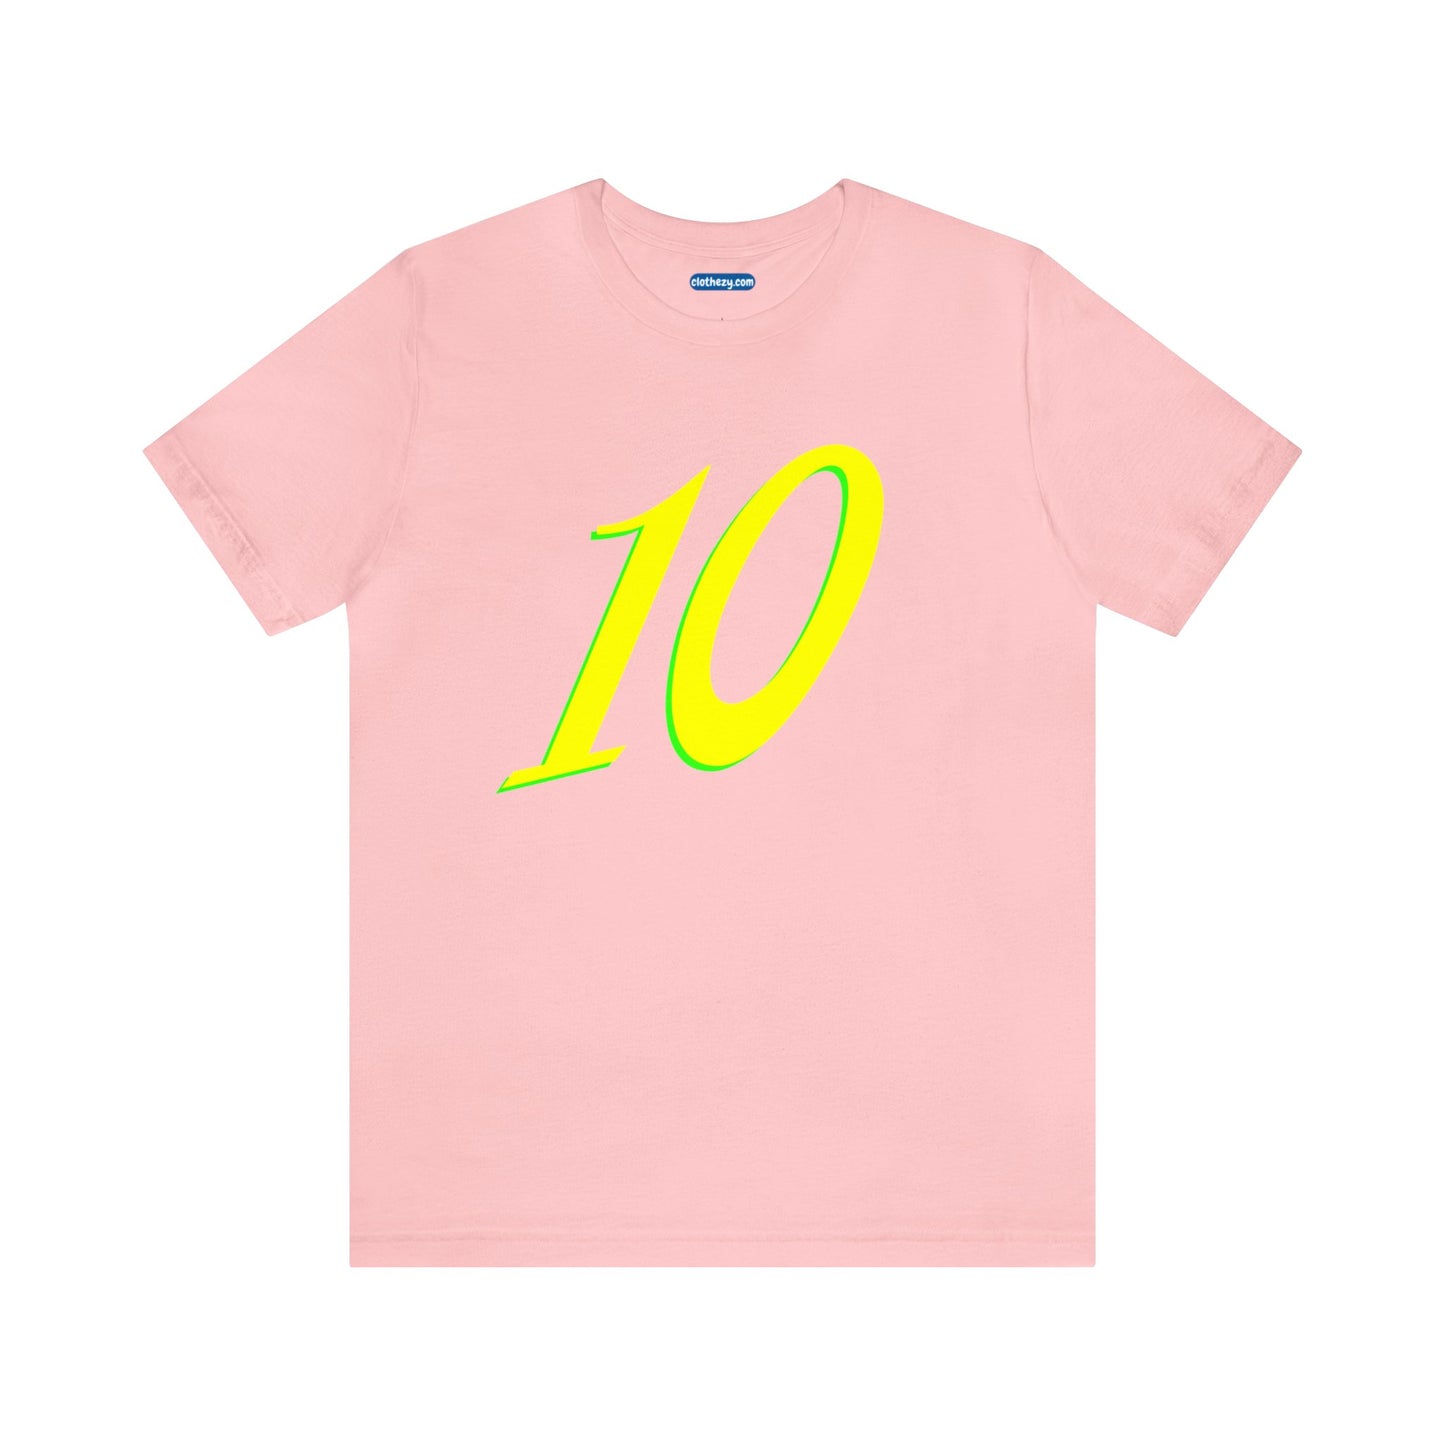 Number 10 Design - Soft Cotton Tee for birthdays and celebrations, Gift for friends and family, Multiple Options by clothezy.com in Pink Size Small - Buy Now